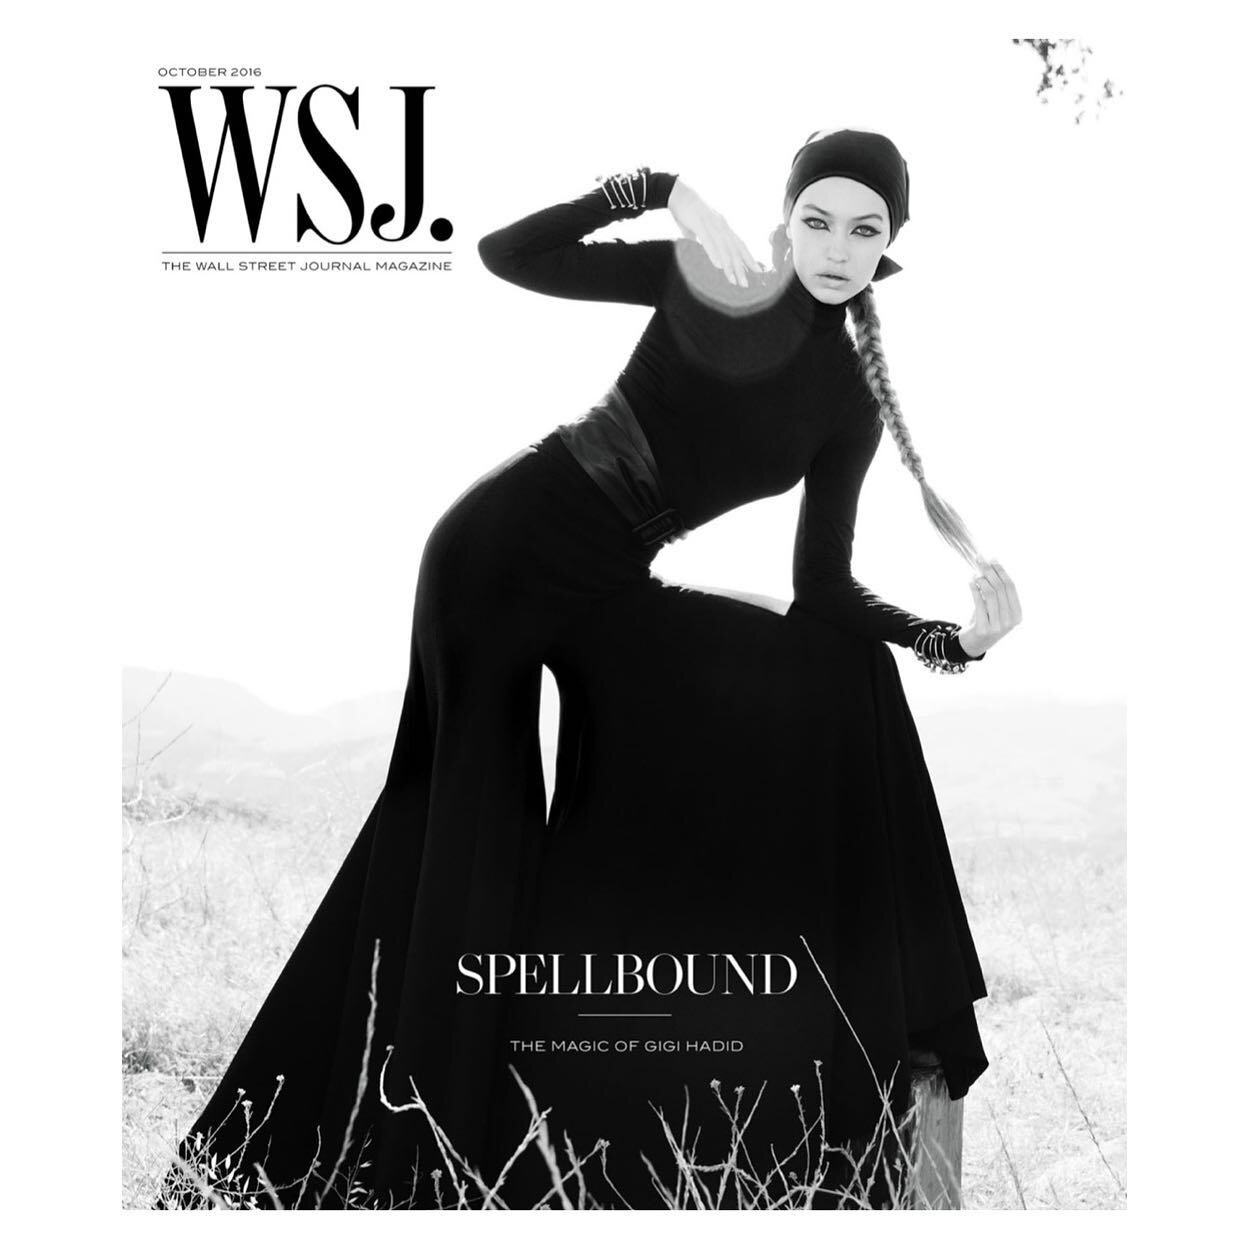 &ldquo;Spellbound&rdquo; WSJ Magazine October 2016 by Inez and Vinoodh 
 
Photographer- @InezandVinoodh
Stylist- @GeorgeCortina
Makeup- @Kabukinyc
Hair- @Ward_S_Official 
Model- @GigiHadid 

Produced by GE Projects